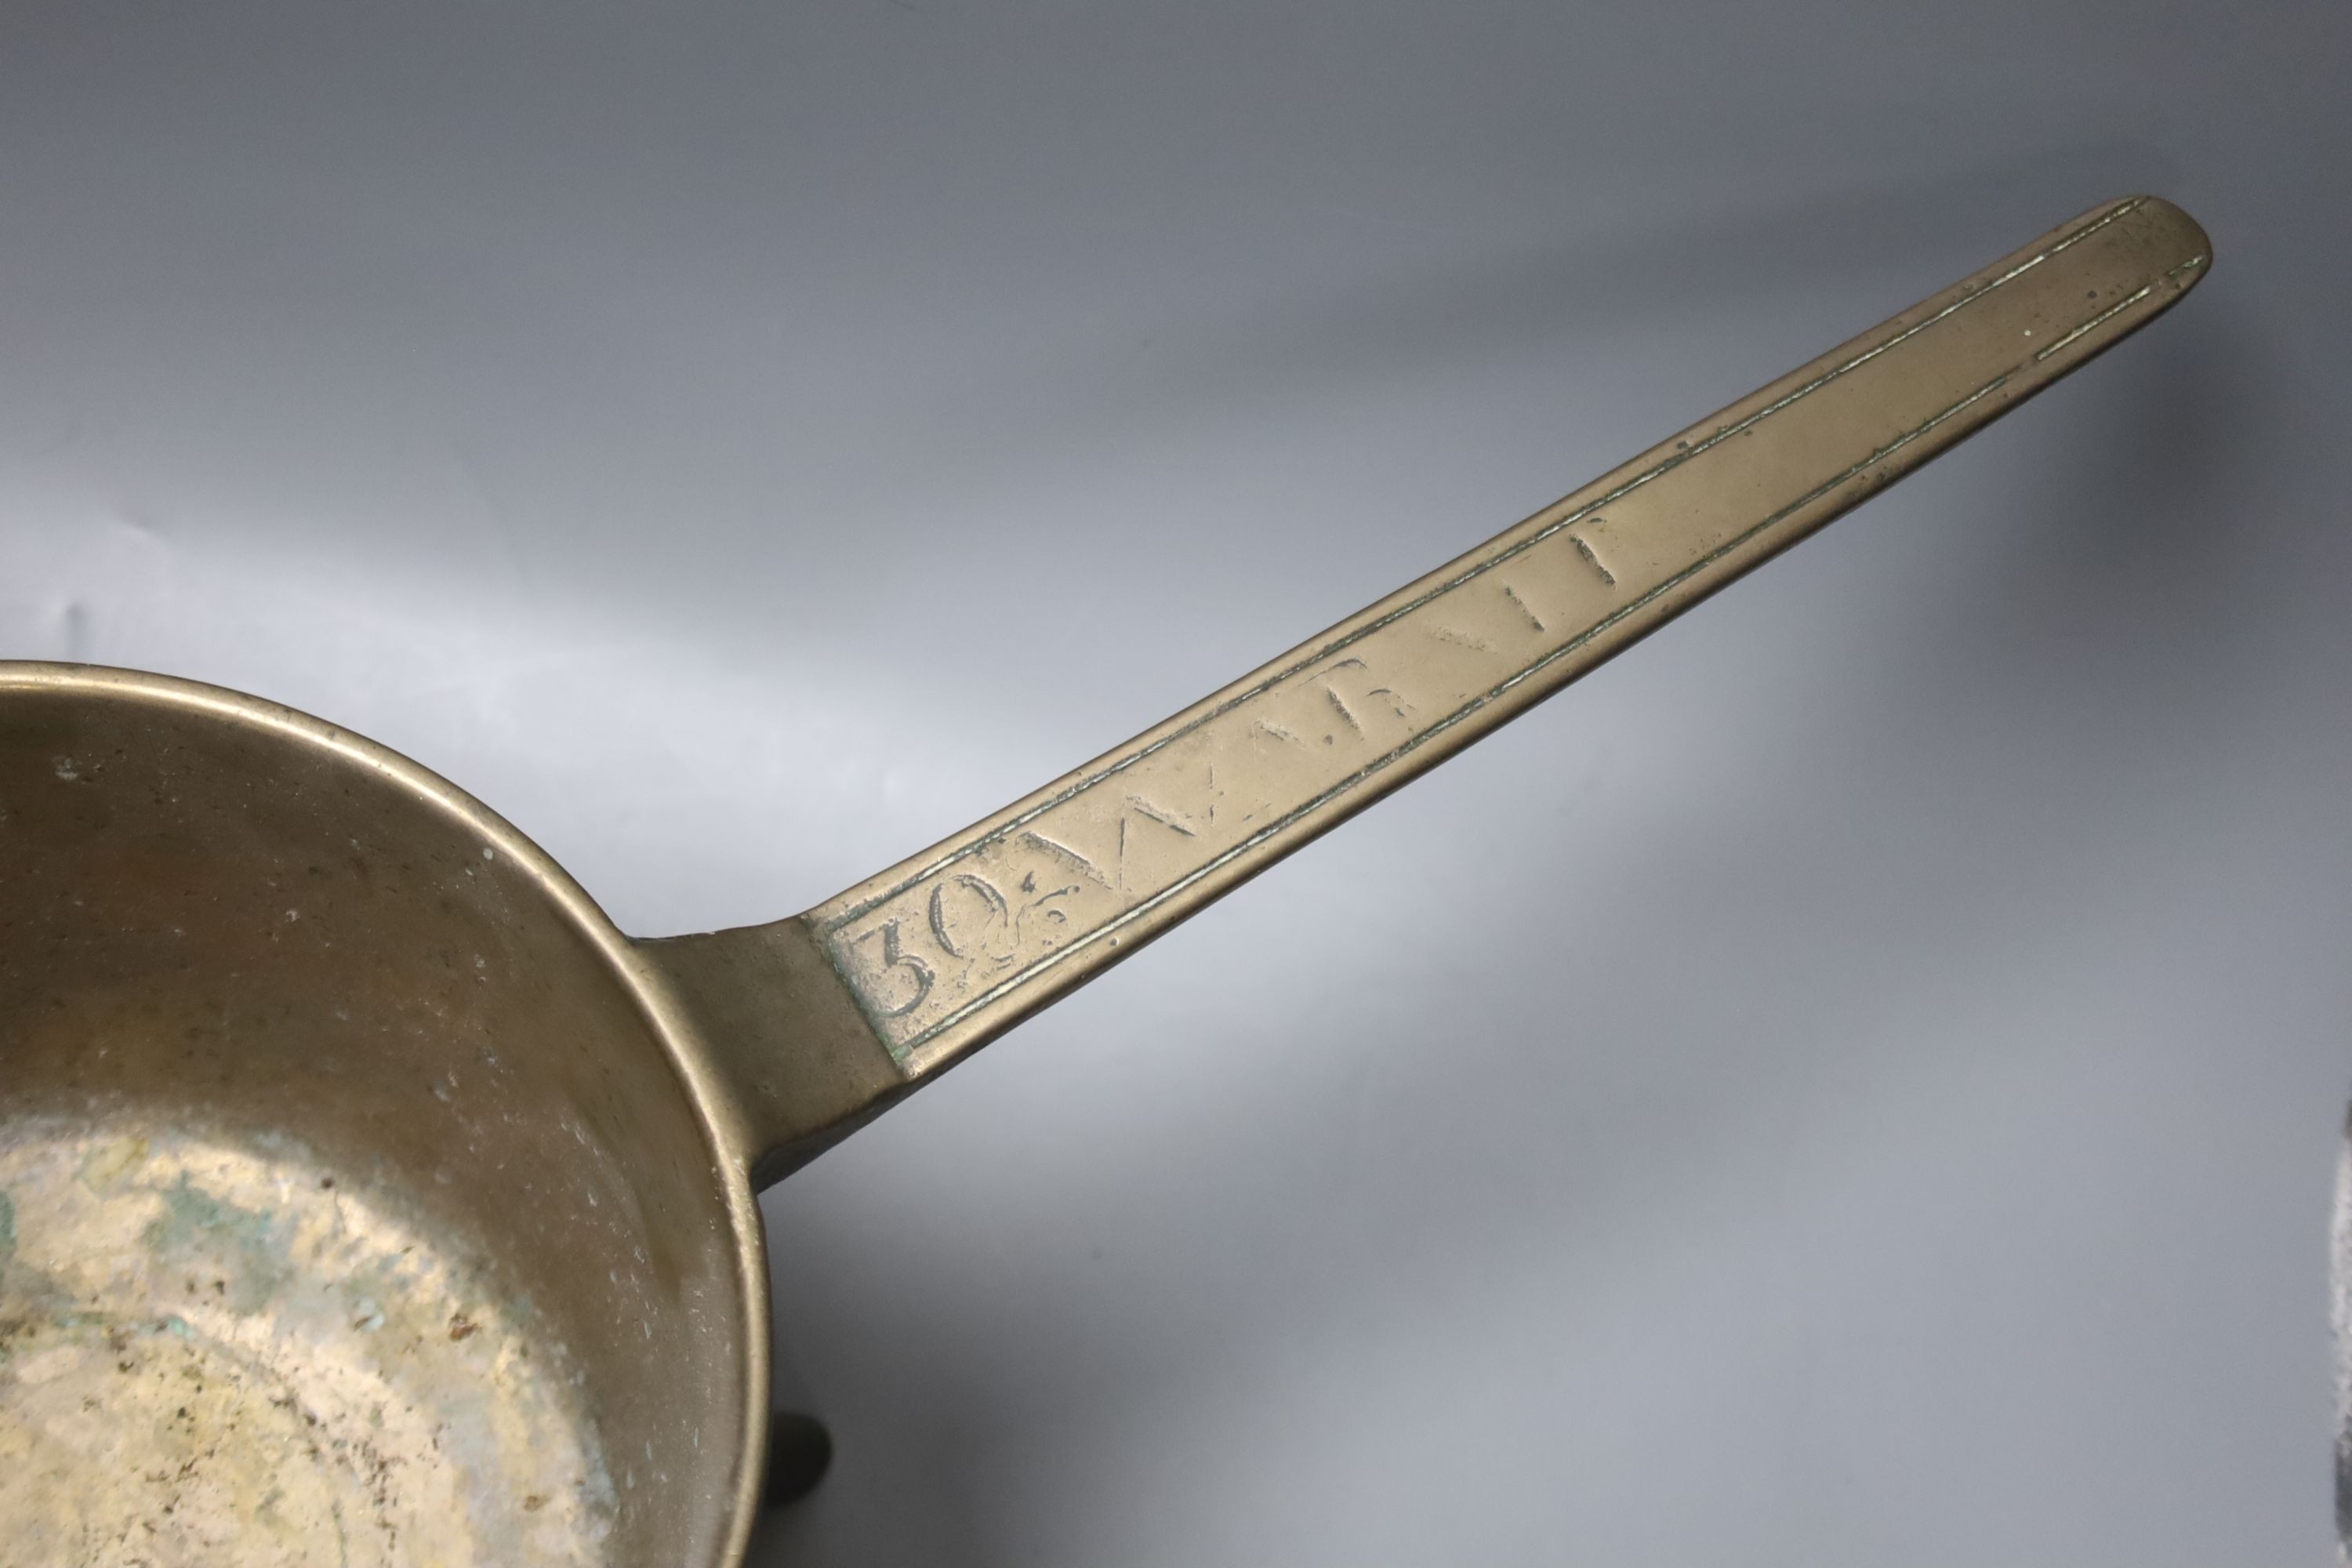 An 18th century ‘30’ bell metal skillet by Warner, by the Warner foundry, 21cm diameter - Image 2 of 2